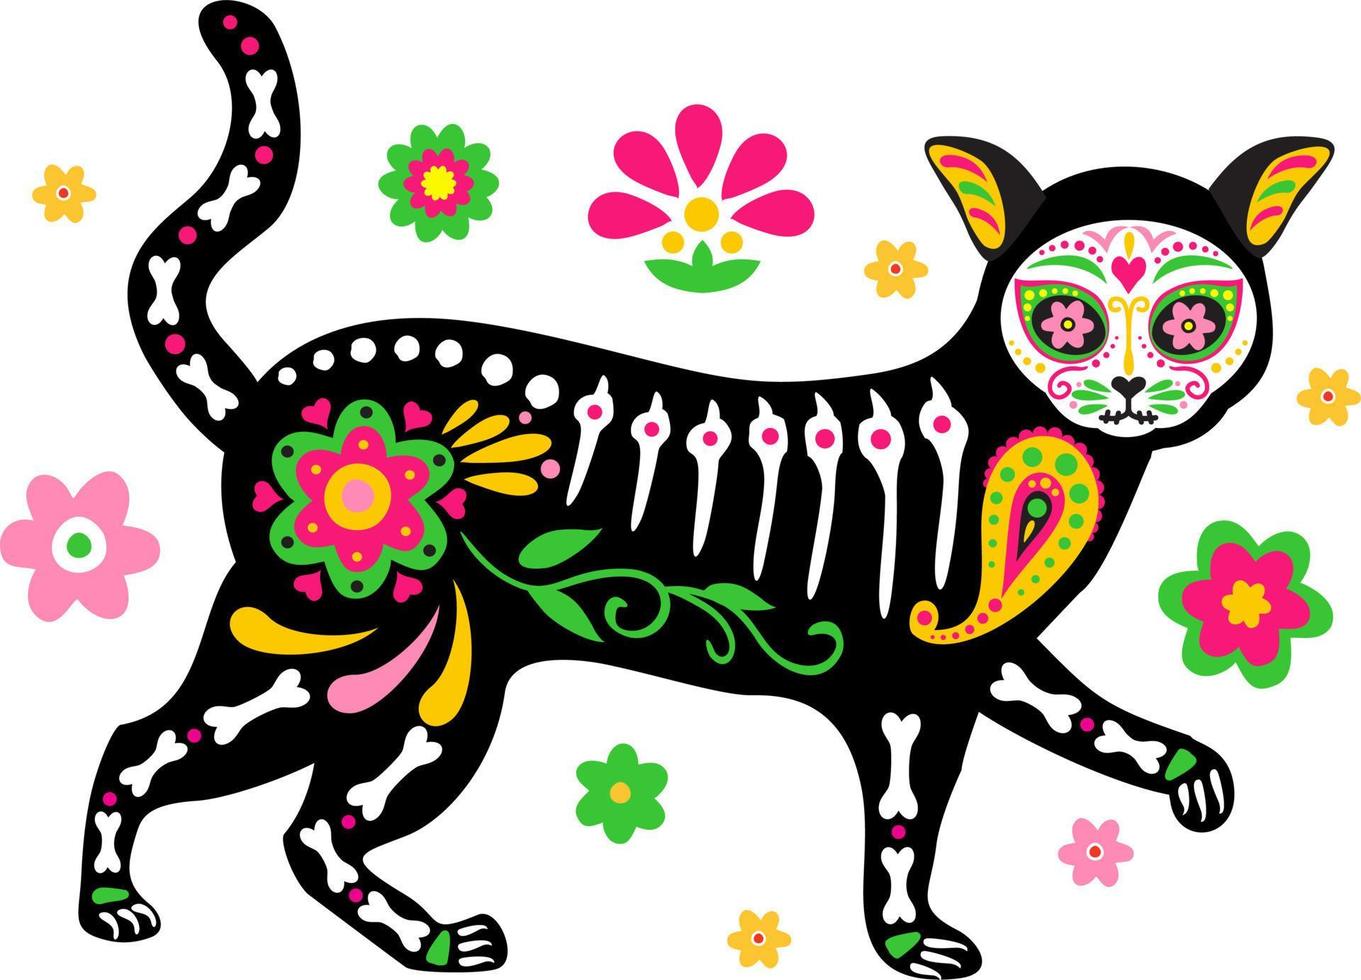 Day of the dead, Dia de los muertos, cute cat skull and skeleton decorated with colorful Mexican vector